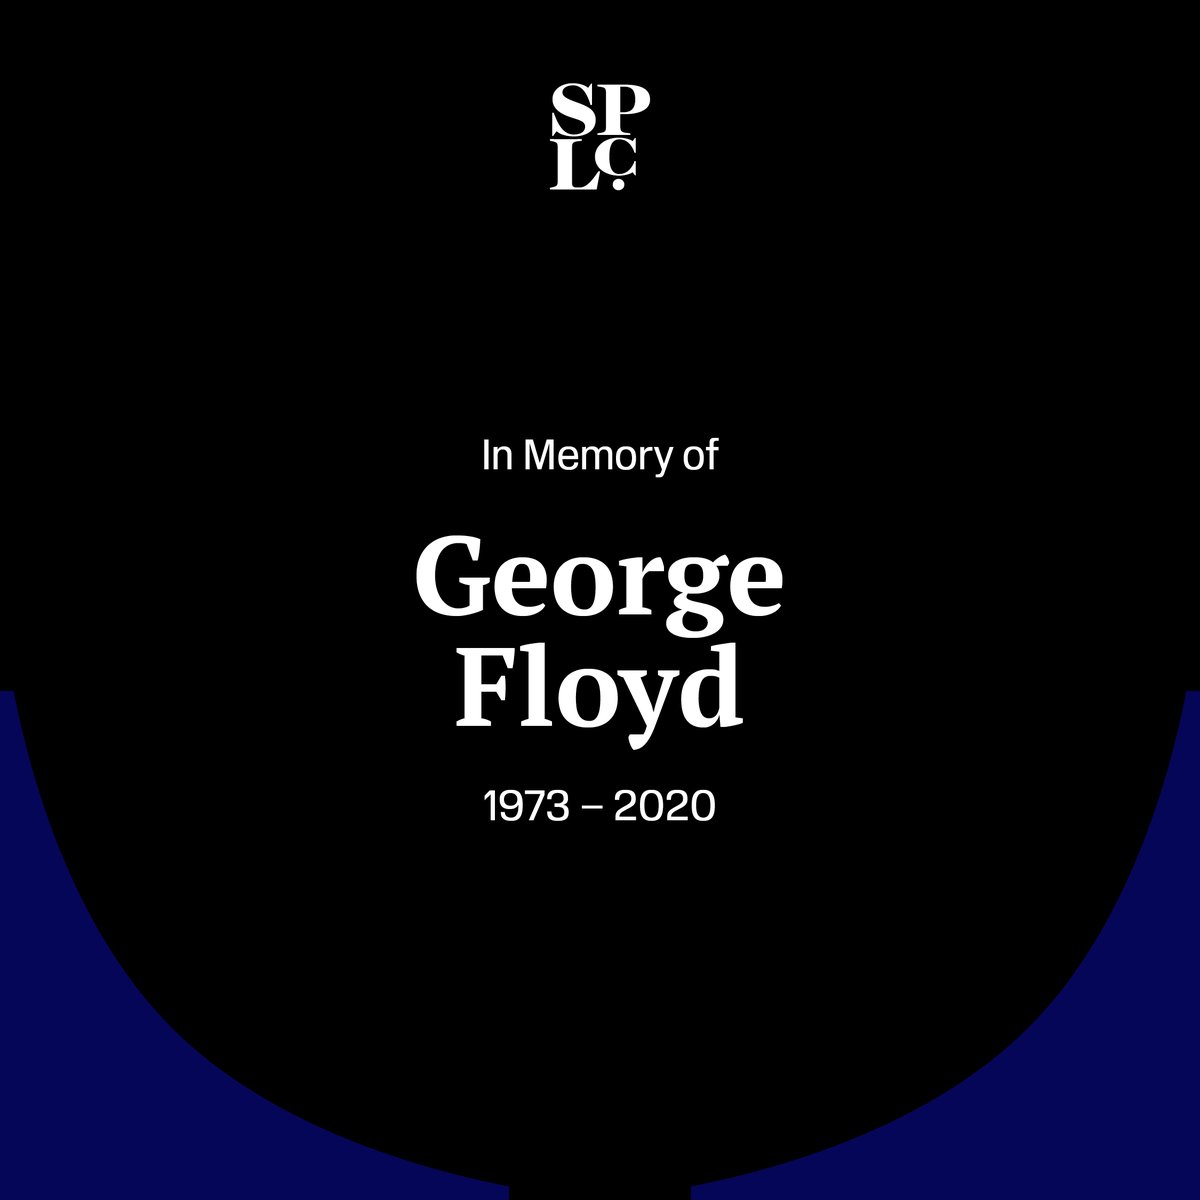 Police were called to a Minneapolis convenience store #OTD. Within 17 minutes, George Floyd was pinned beneath three police officers, showing no signs of life. His killing led to global protests calling for racial justice and police accountability. #TheMarchContinues